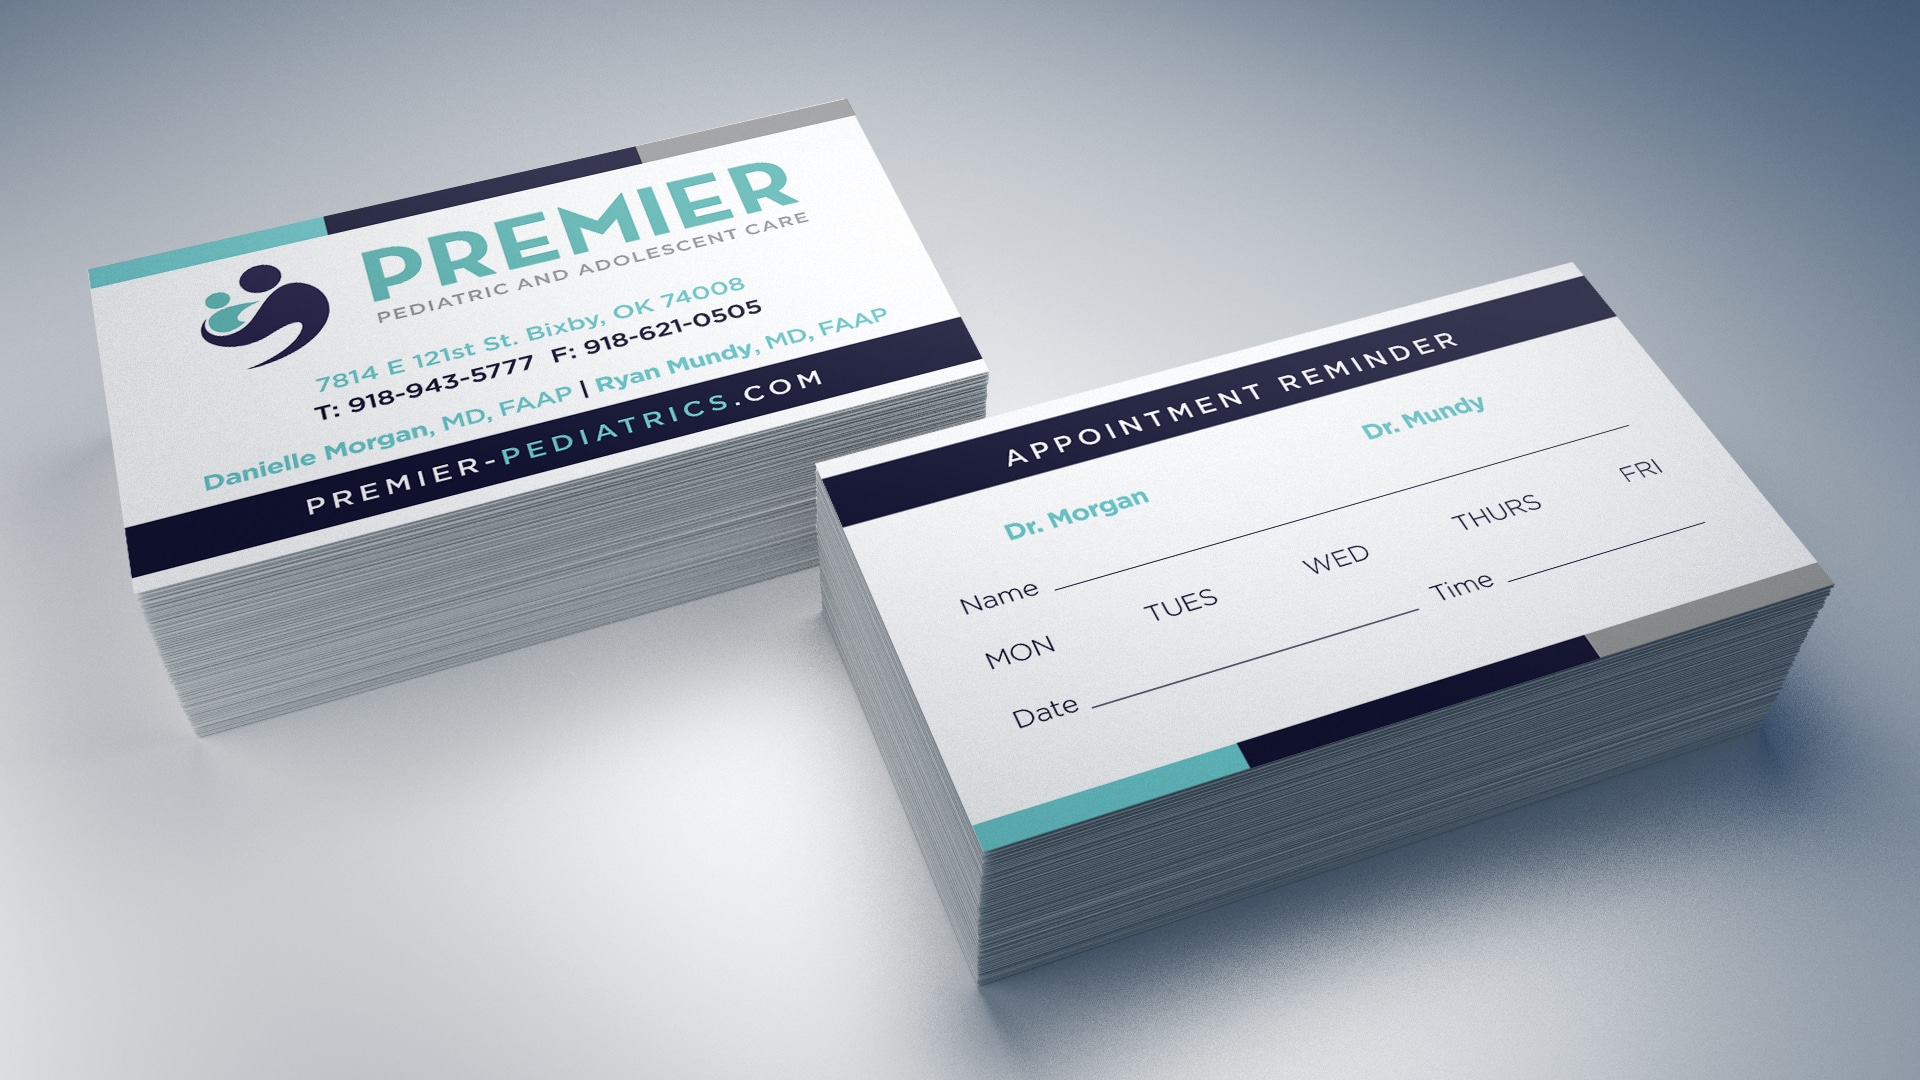 business card design by D2 Branding in Tulsa